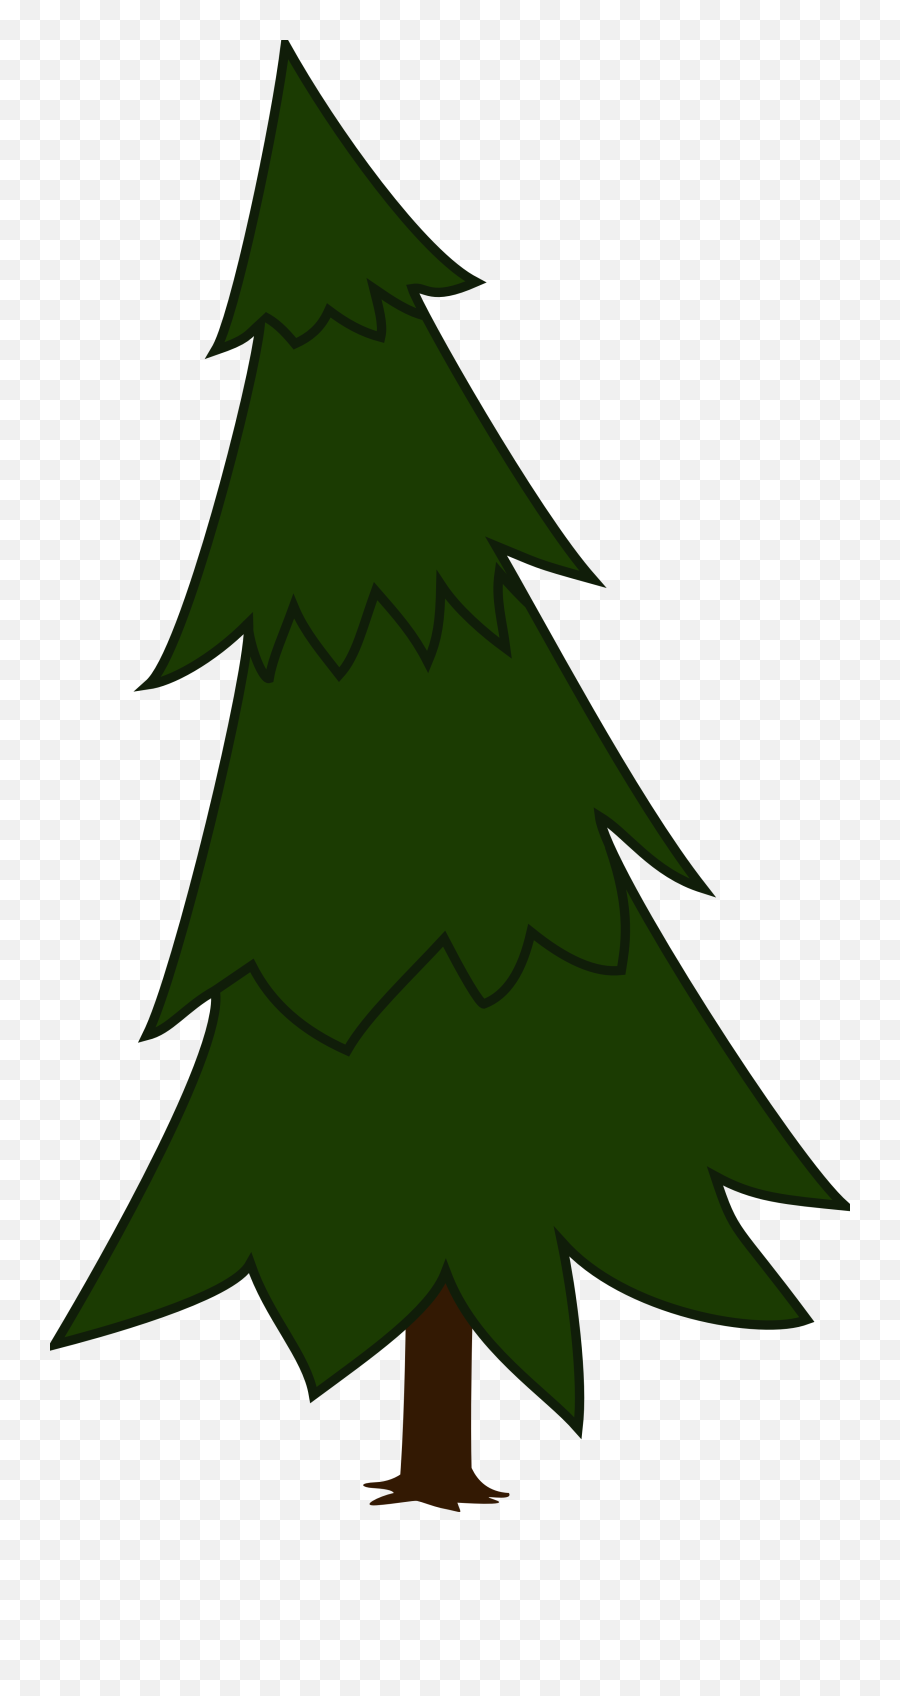 Free Tree Images Clipart Download Free Clip Art Free Clip - Spruce Tree Clipart Emoji,Christmas Tree Clipart